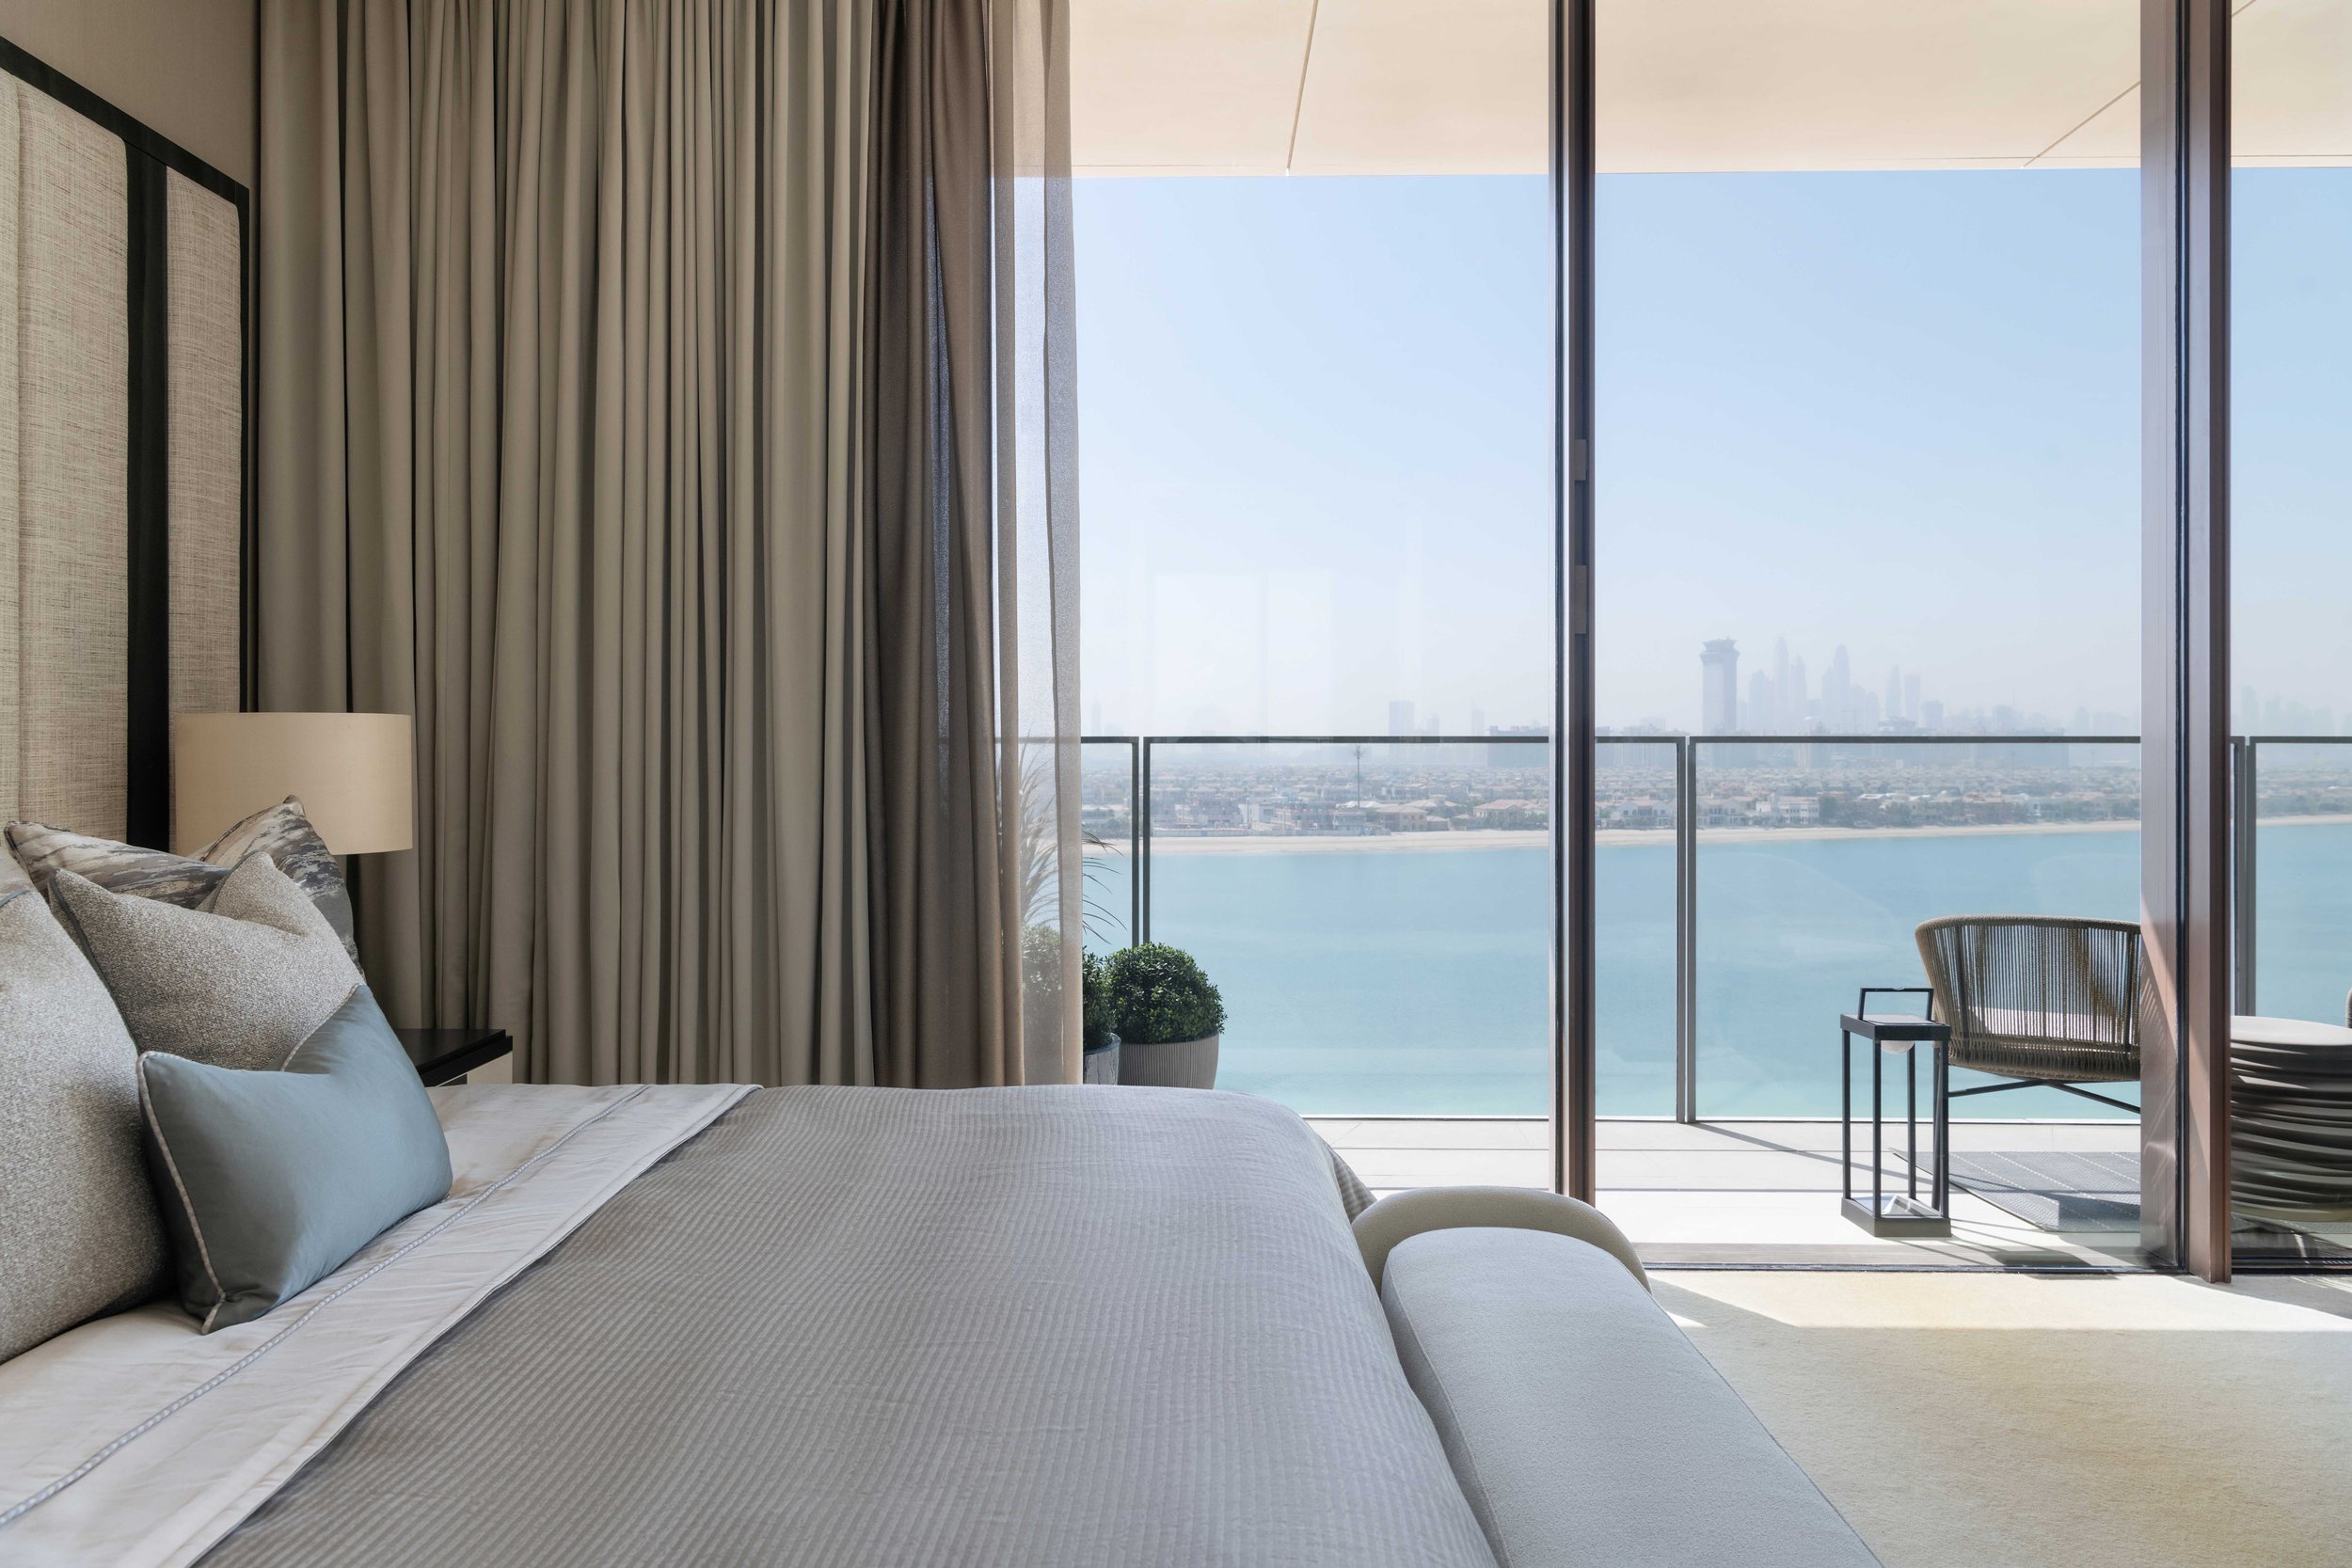 accouter_atlantis_the_royal_residences_guest_bedroom_1_003.jpg